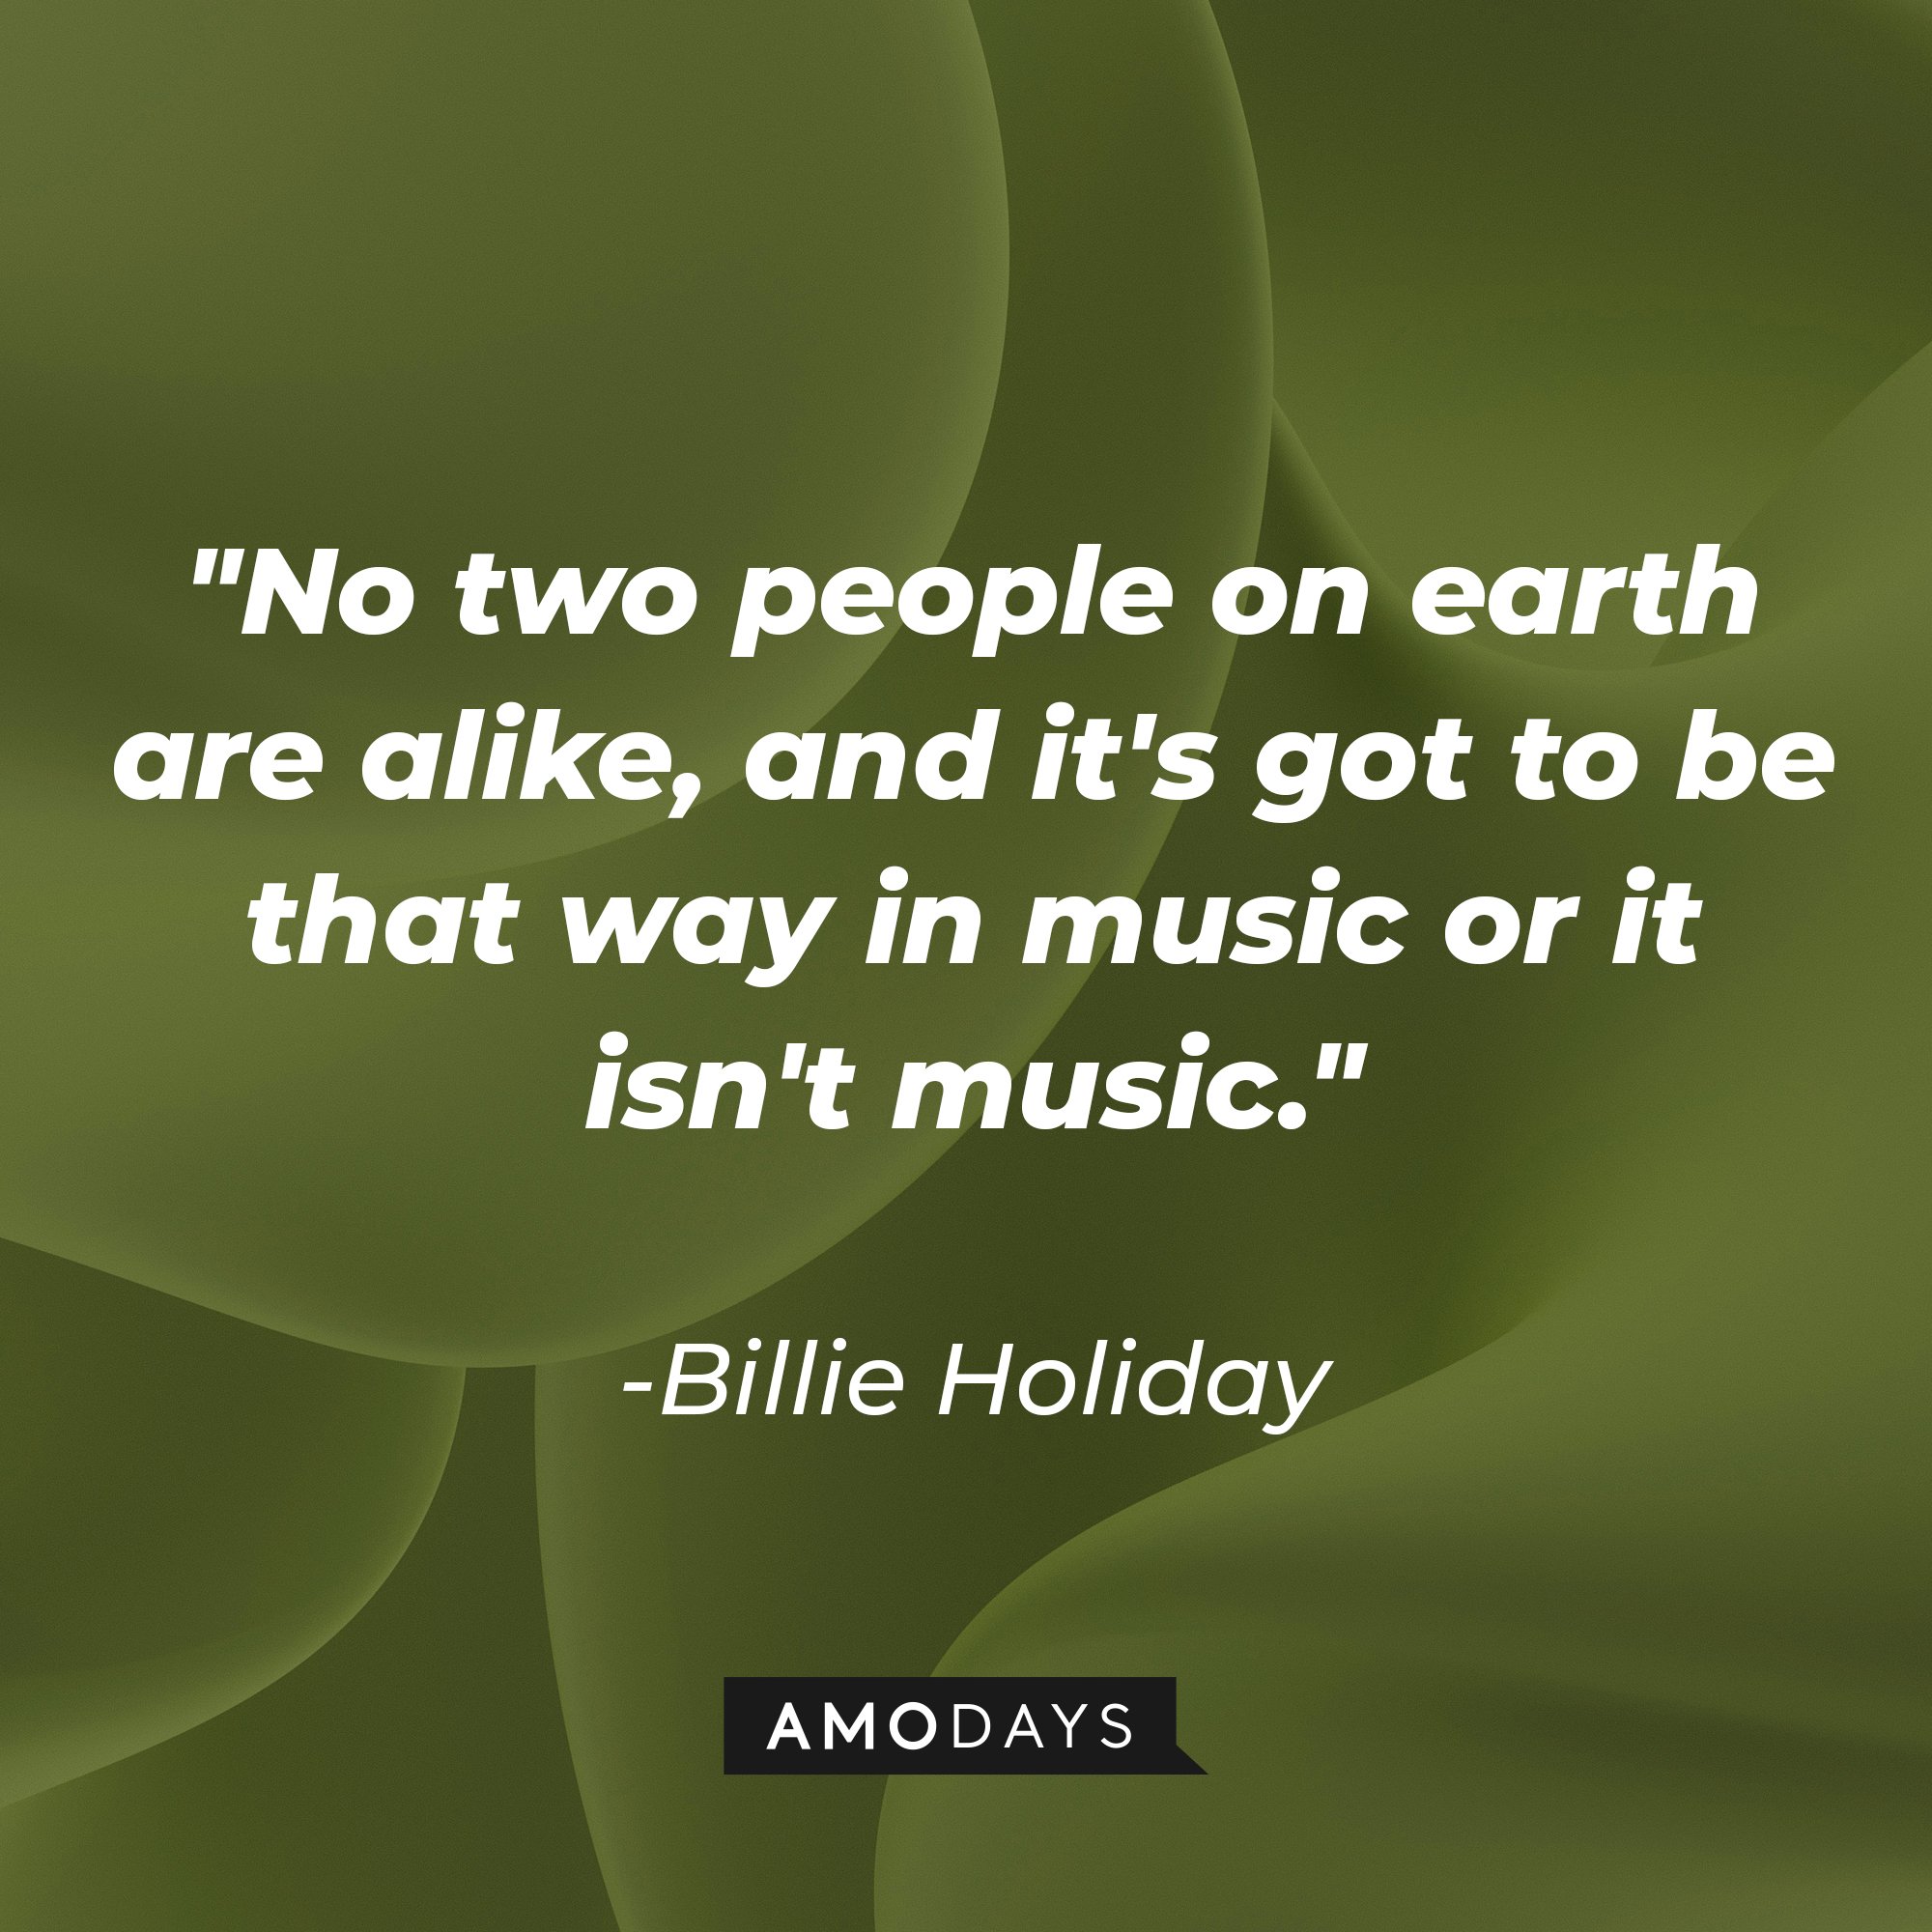 Billie Holiday's quote "No two people on earth are alike, and it's got to be that way in music or it isn't music."  | Source: Unsplash.com